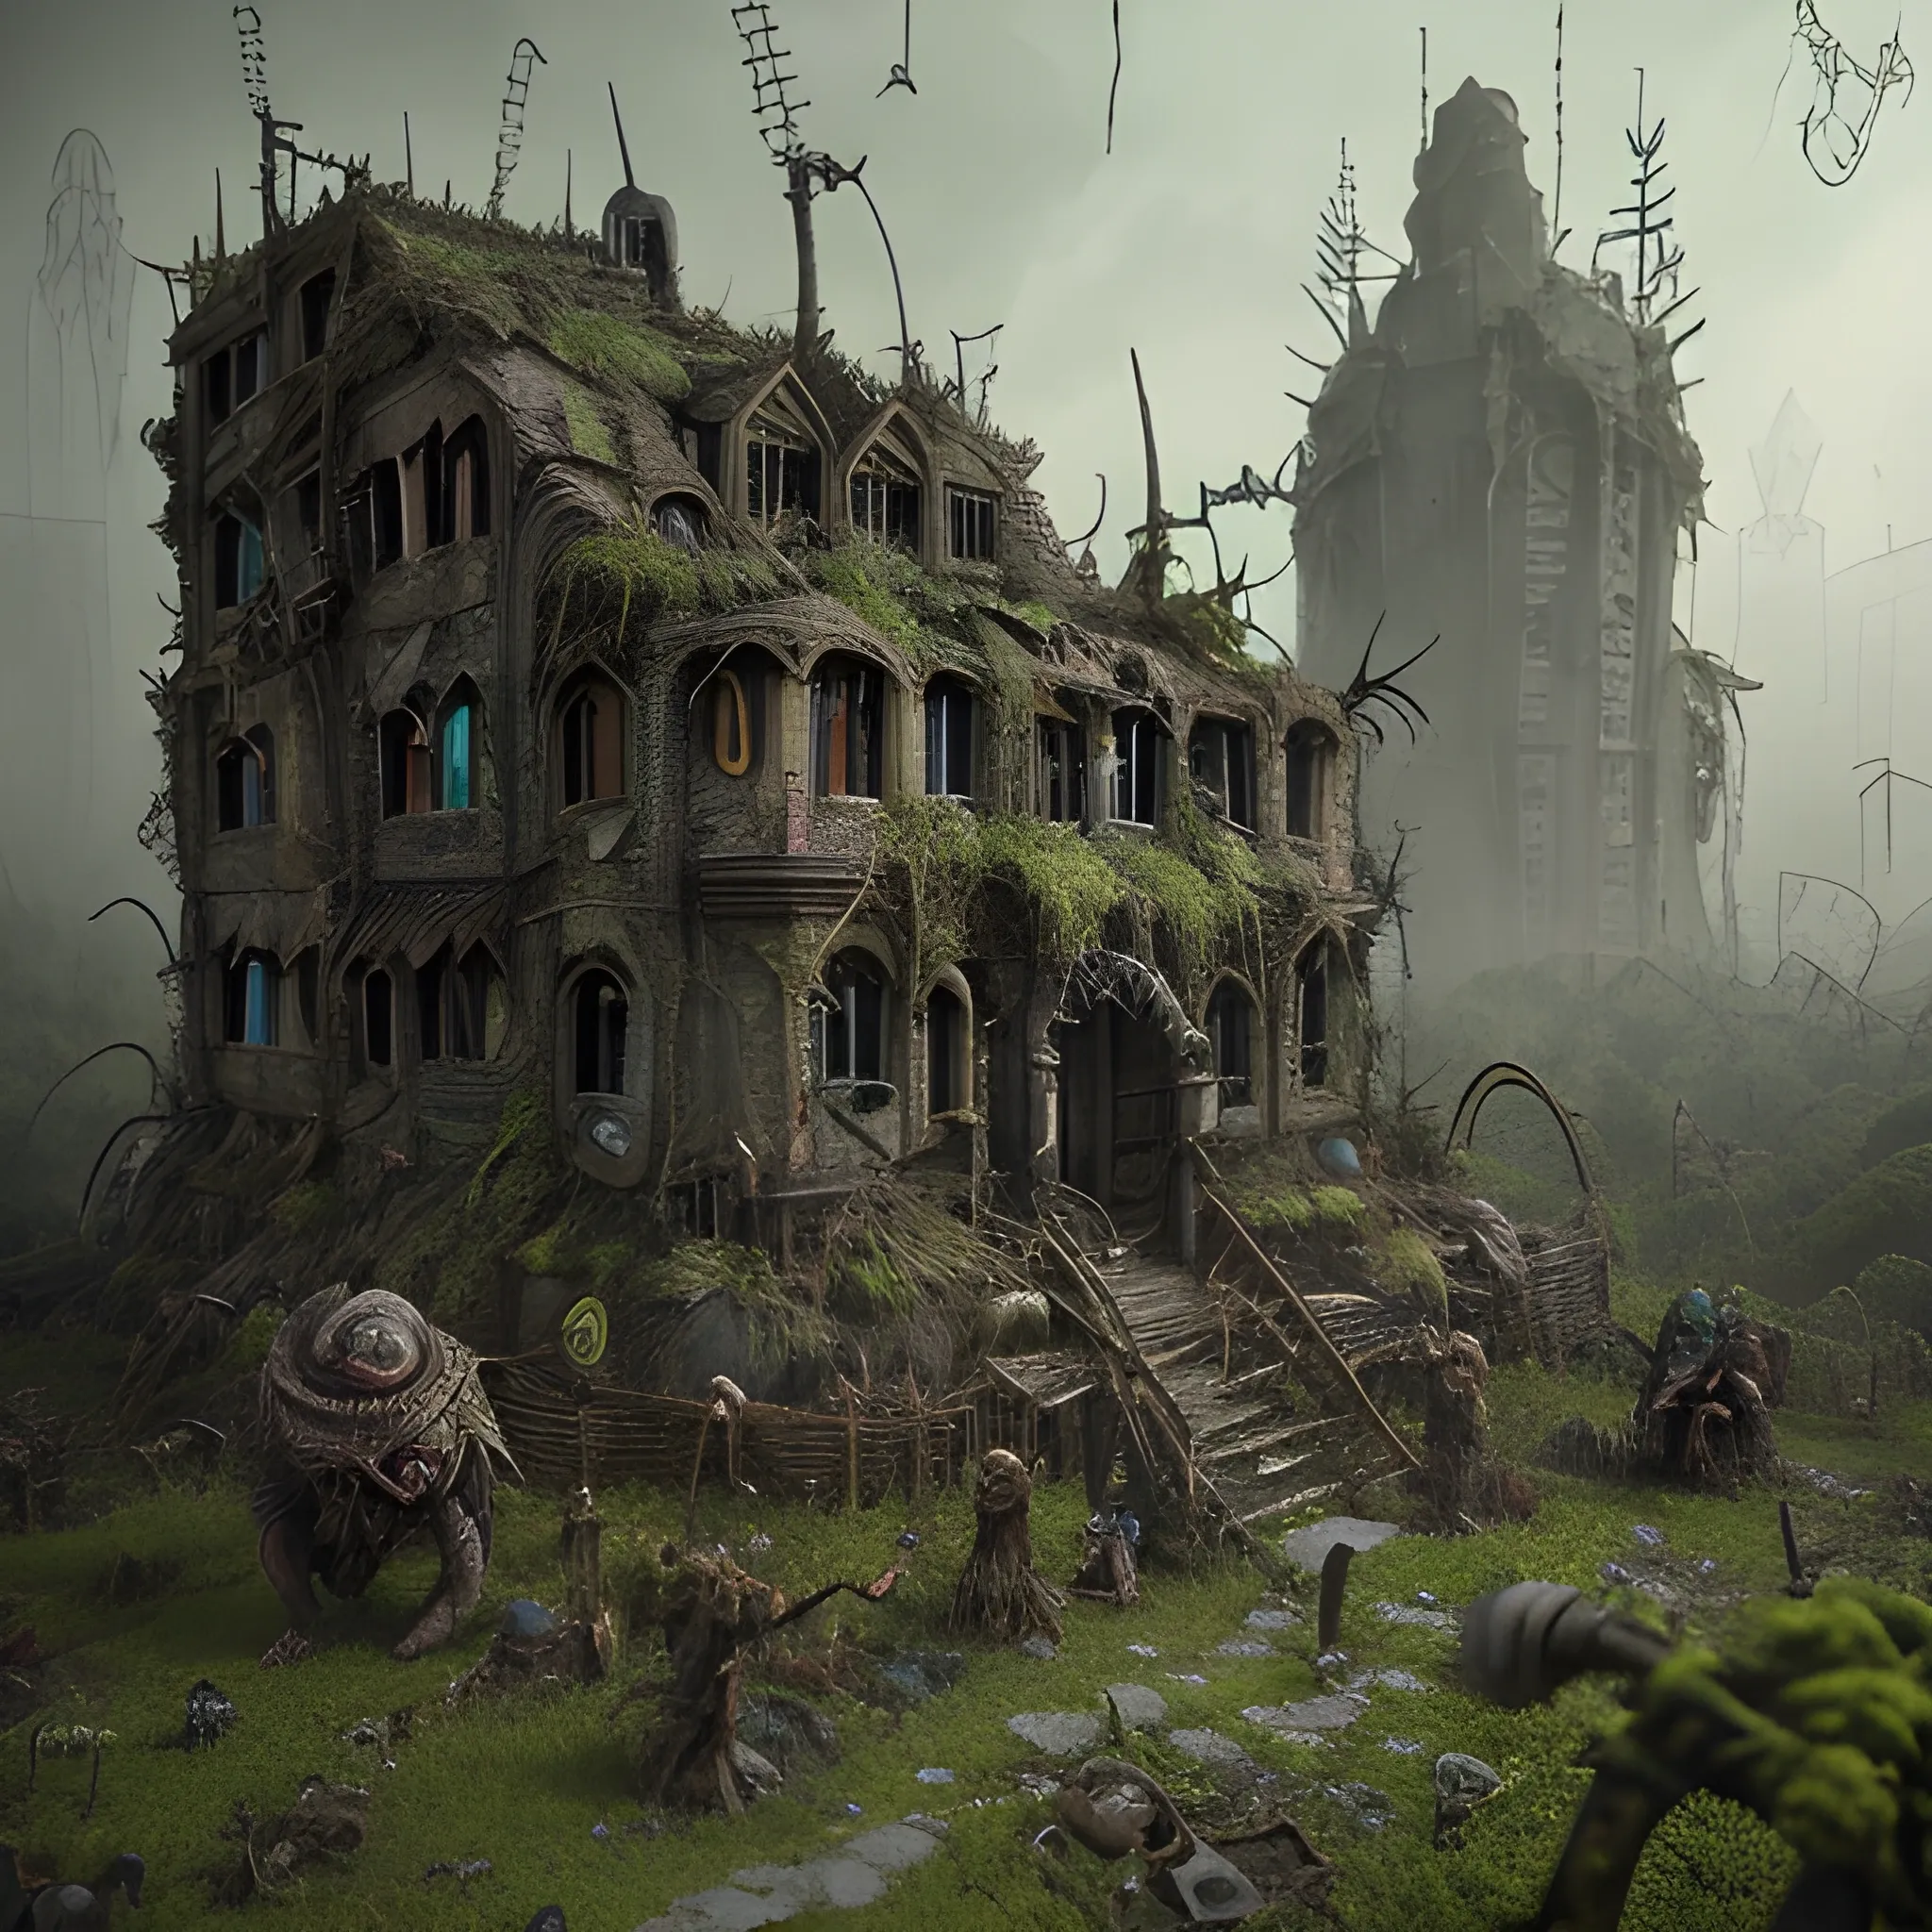 dirty, eerie orcs, goblins, ragged cloak, belts and pouches, spear,  mossy, decaying, rusty and worn,  intricate detail,  show antennas and wires and circuits, old apocalyptic city wasteland overgrown by oppressive huge forest, vines, plants and roots growing, cracking through walls, 3d render,  high detail, 